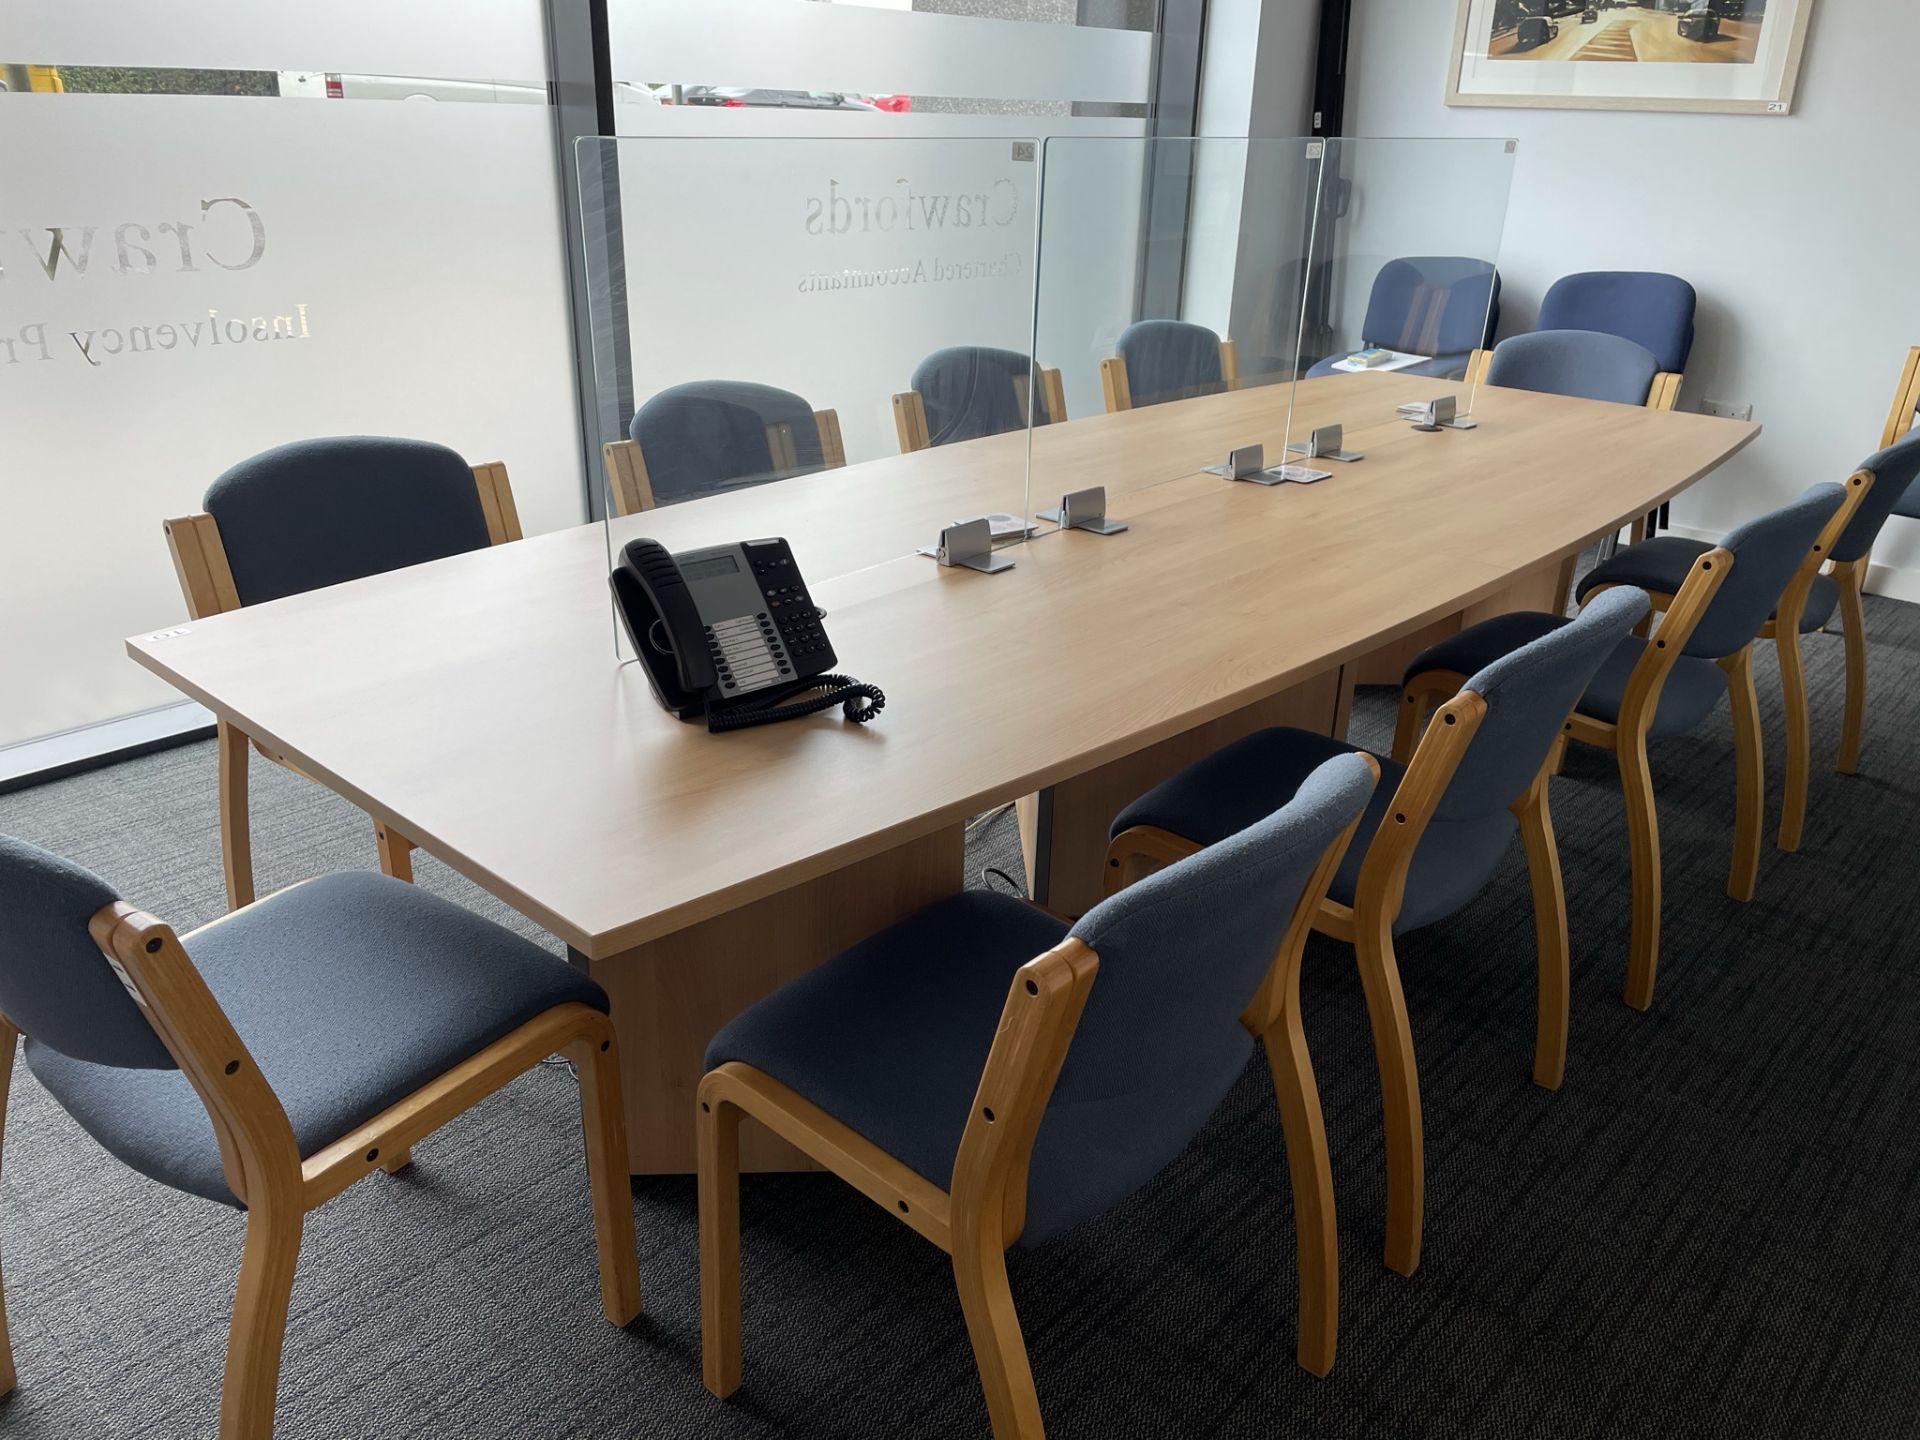 2 Section Bow Shaped Light Wood Effect Meeting Room Table | 320 x 120cm - Image 2 of 2